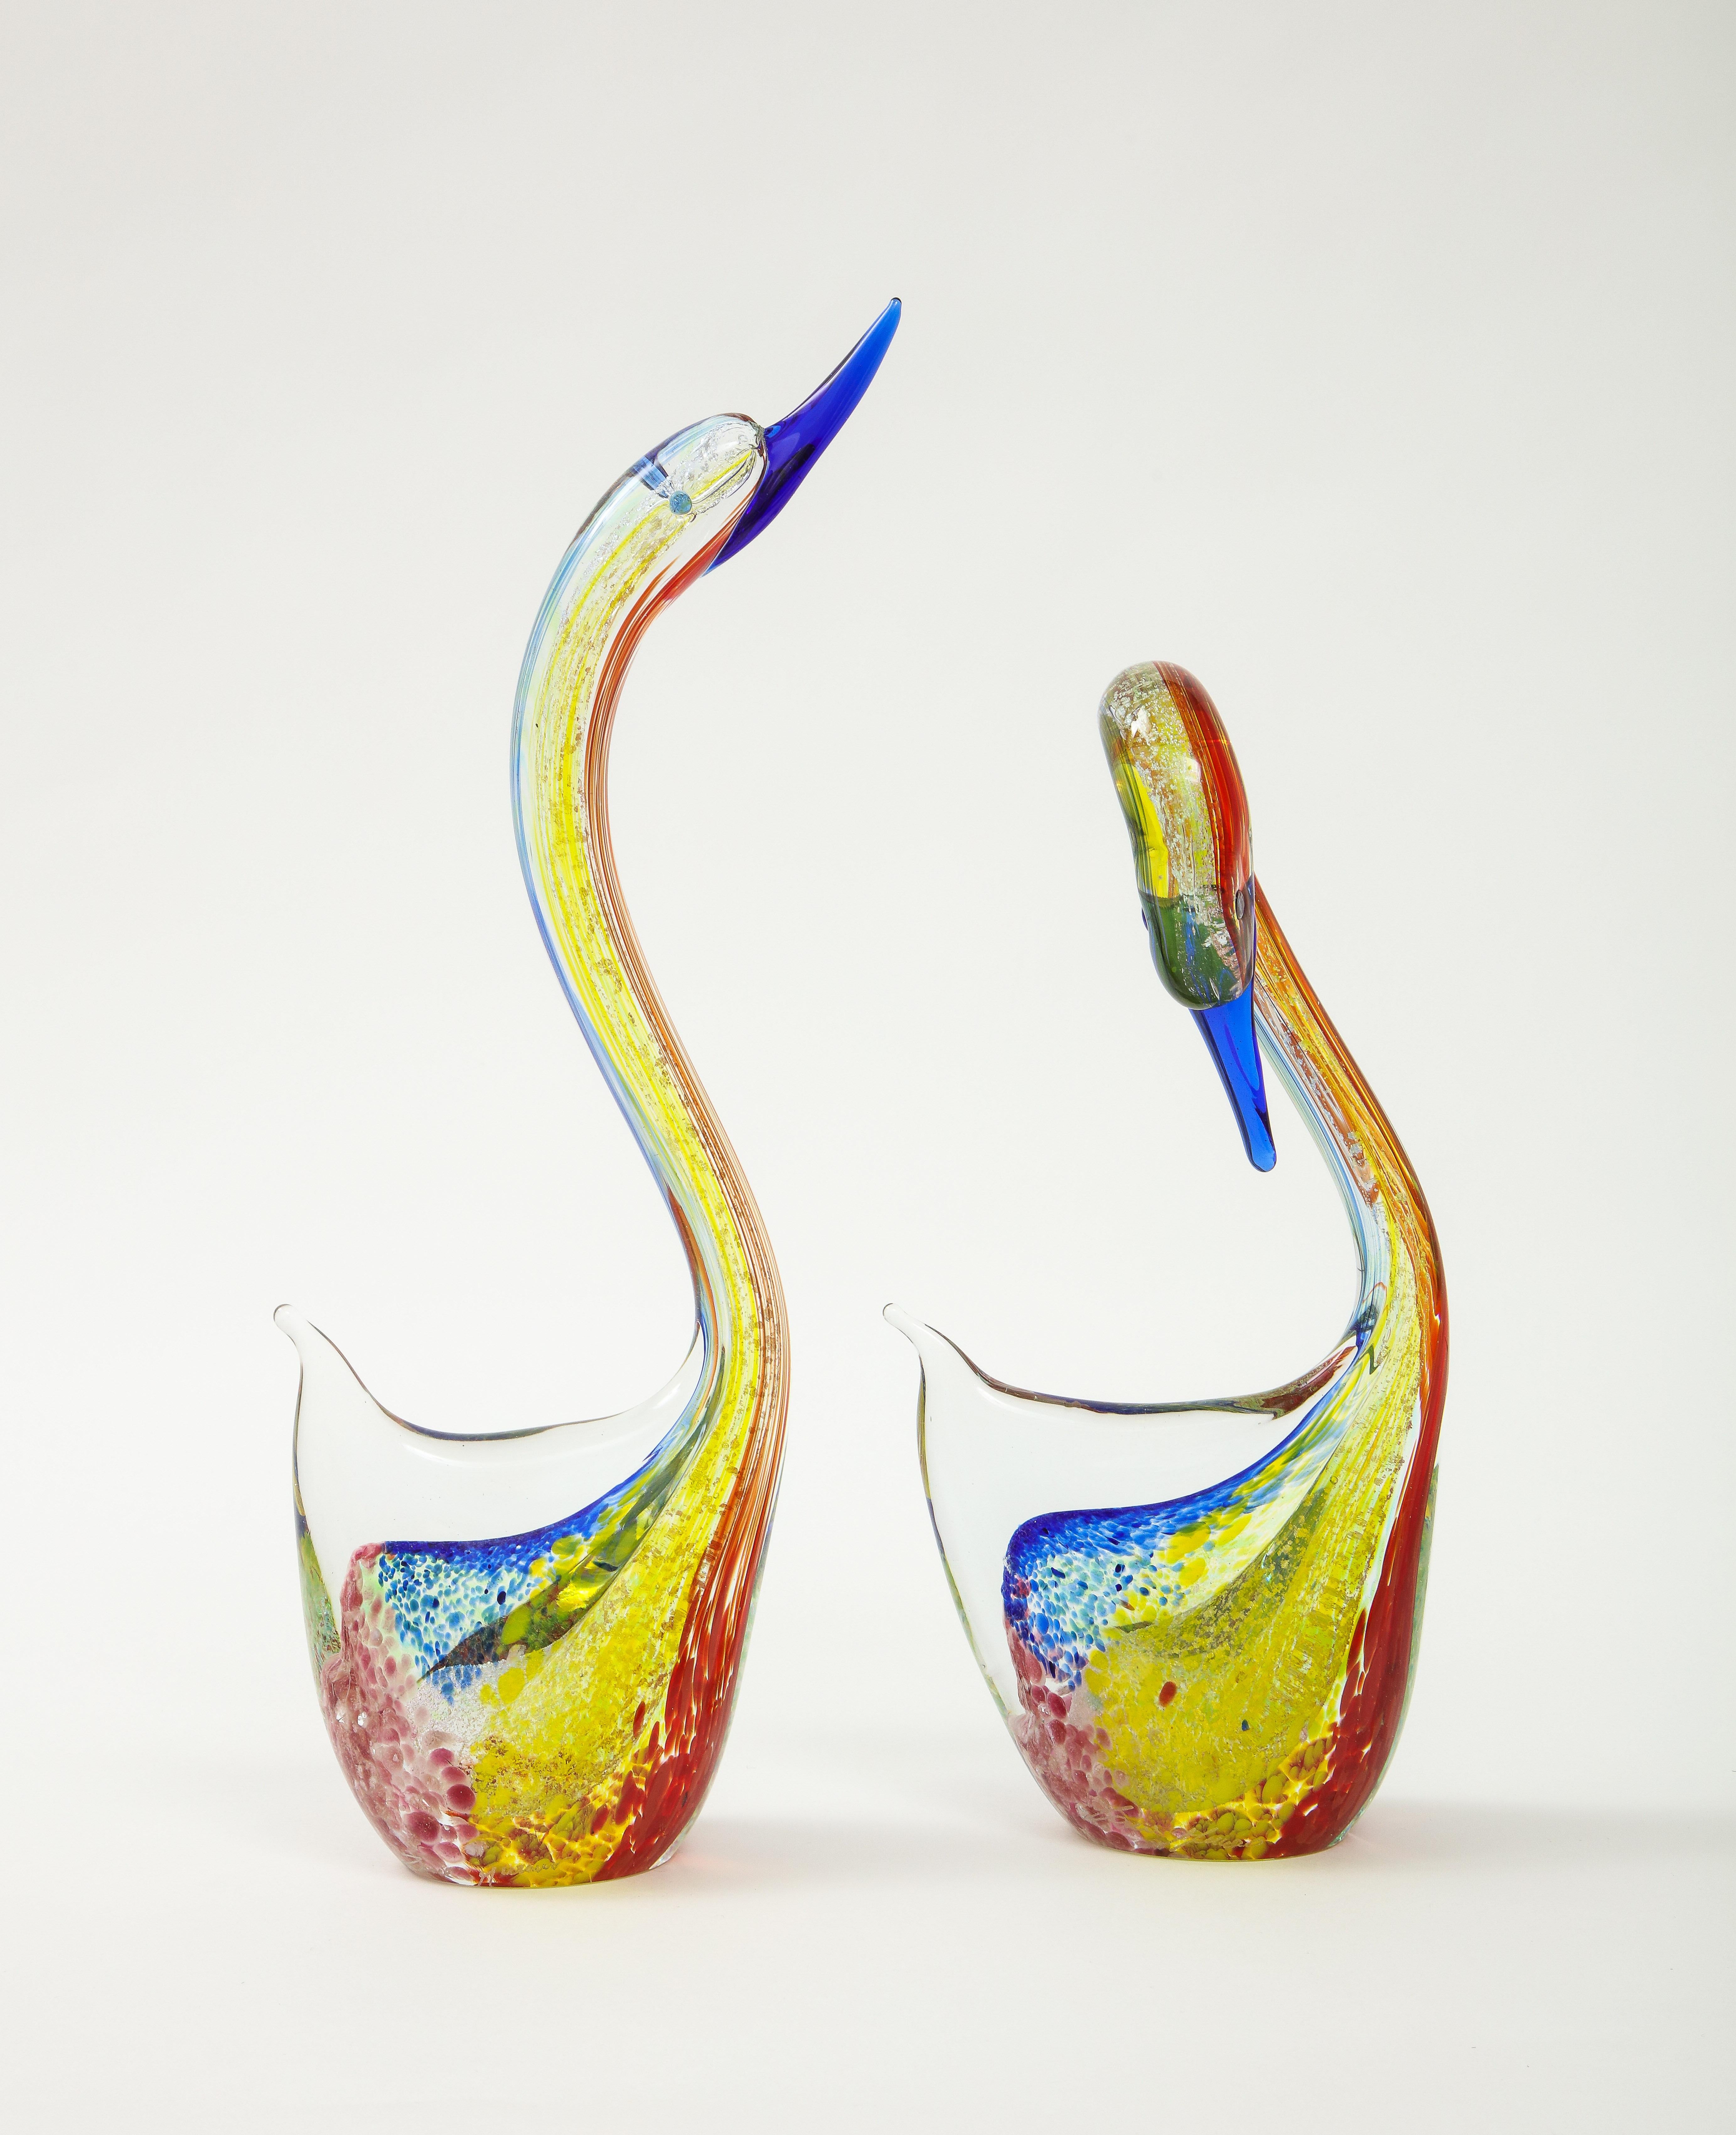 1980s modern Murano glass swans sculptures signed and label, in vintage original condition with minor wear and patina due to age and use.

Smaller swan measurements are: width 5.5'' depth 2.5'' height 10.5''